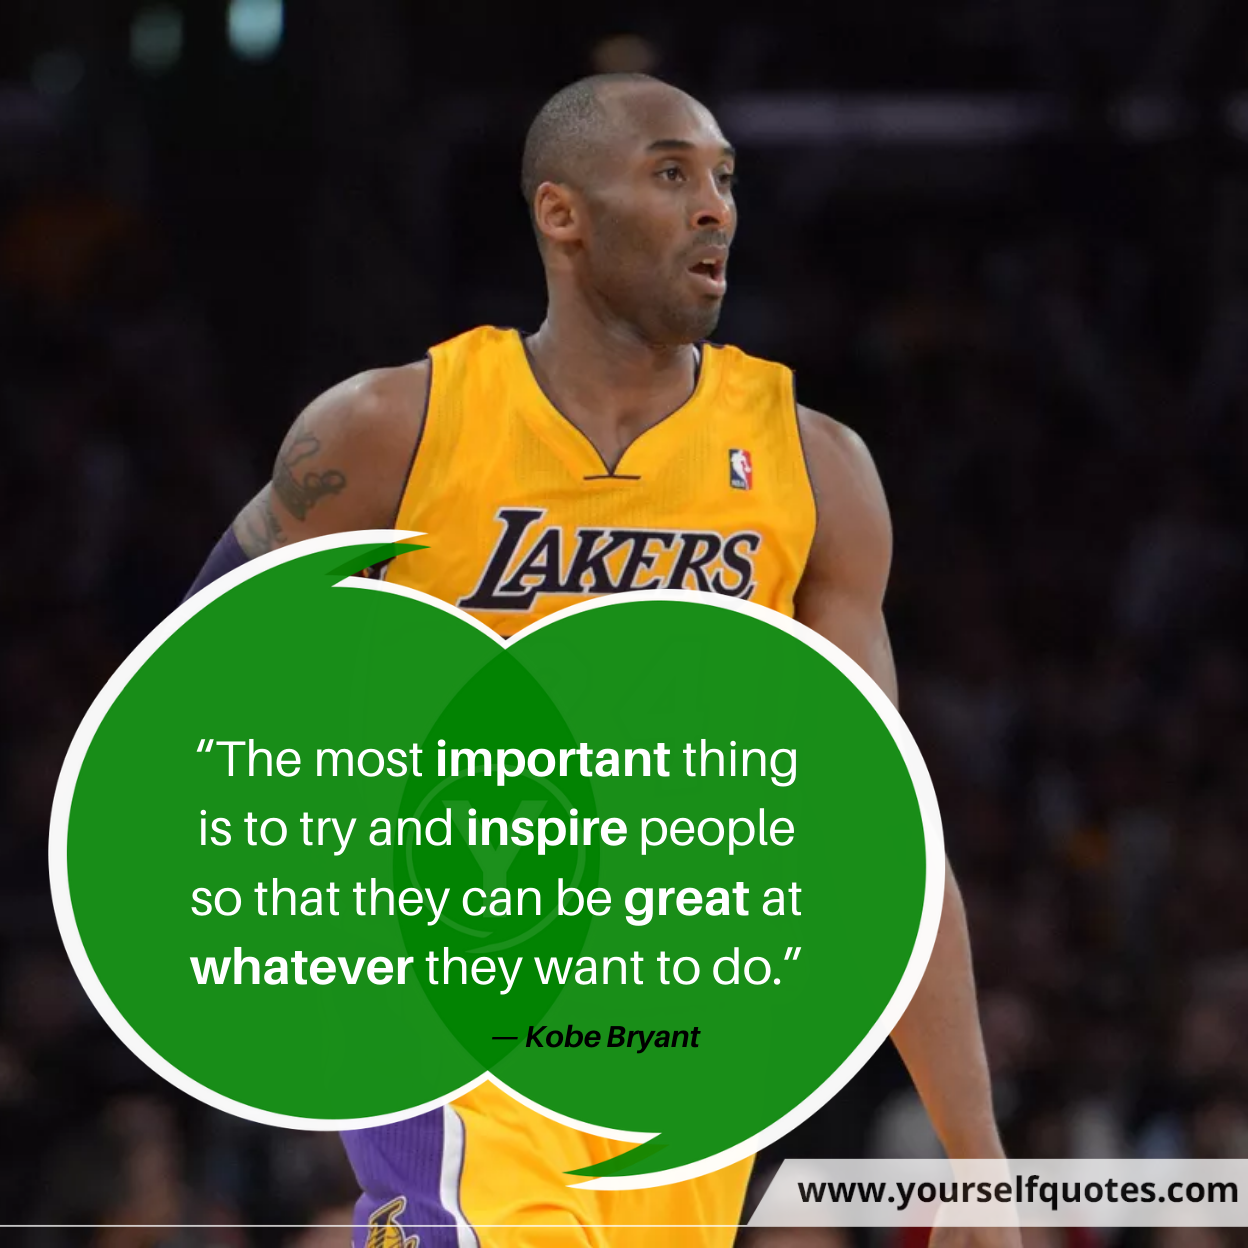 Quotes by Kobe Bryant